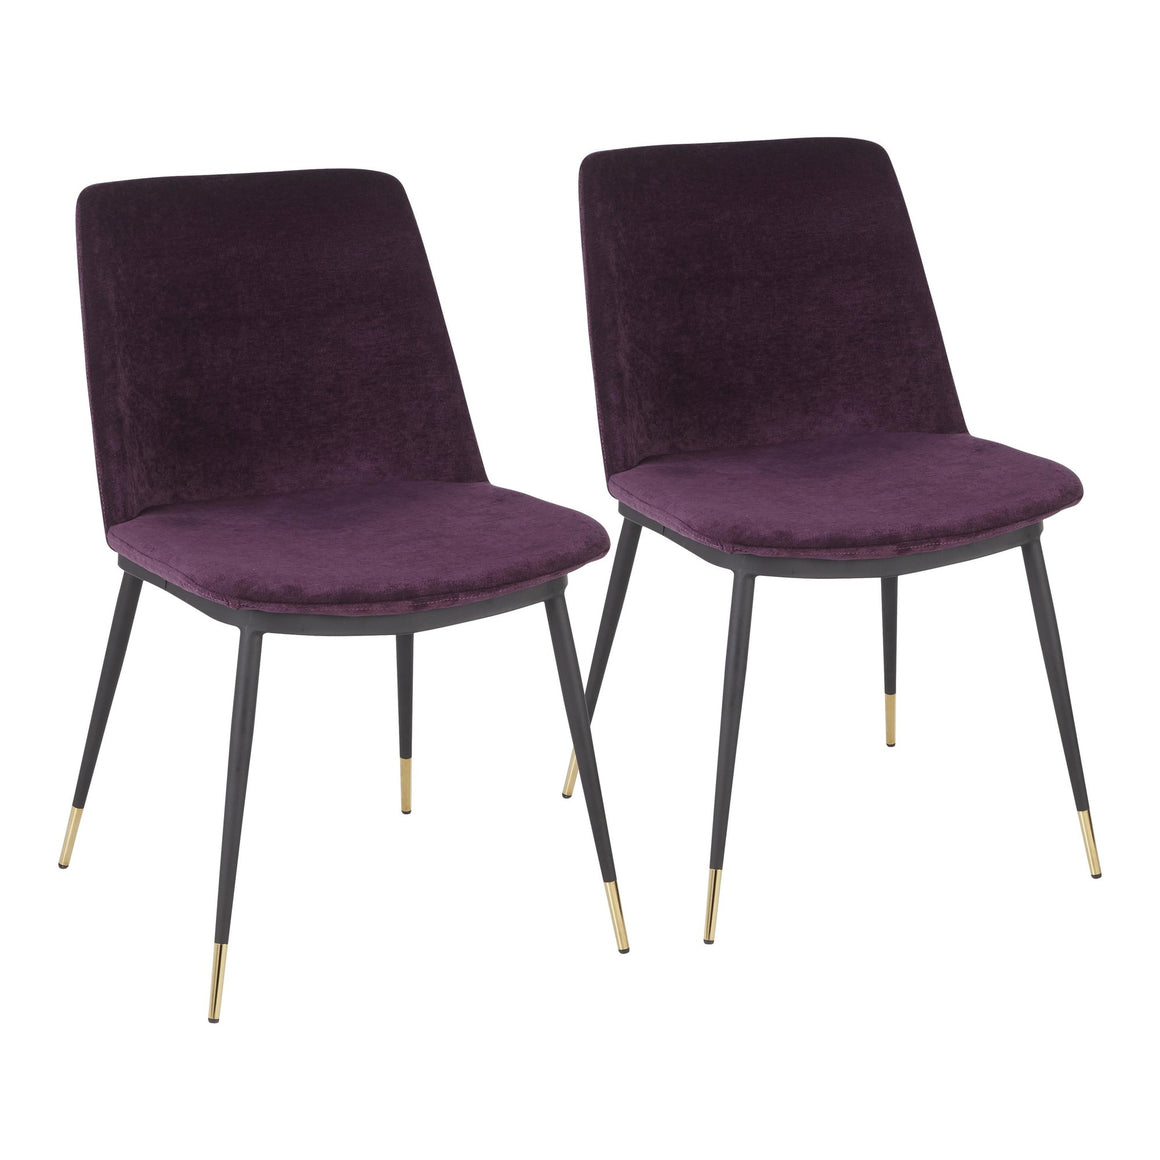 Wanda Contemporary Chair with Black Metal Legs with Gold Accent and Purple Fabric by LumiSource